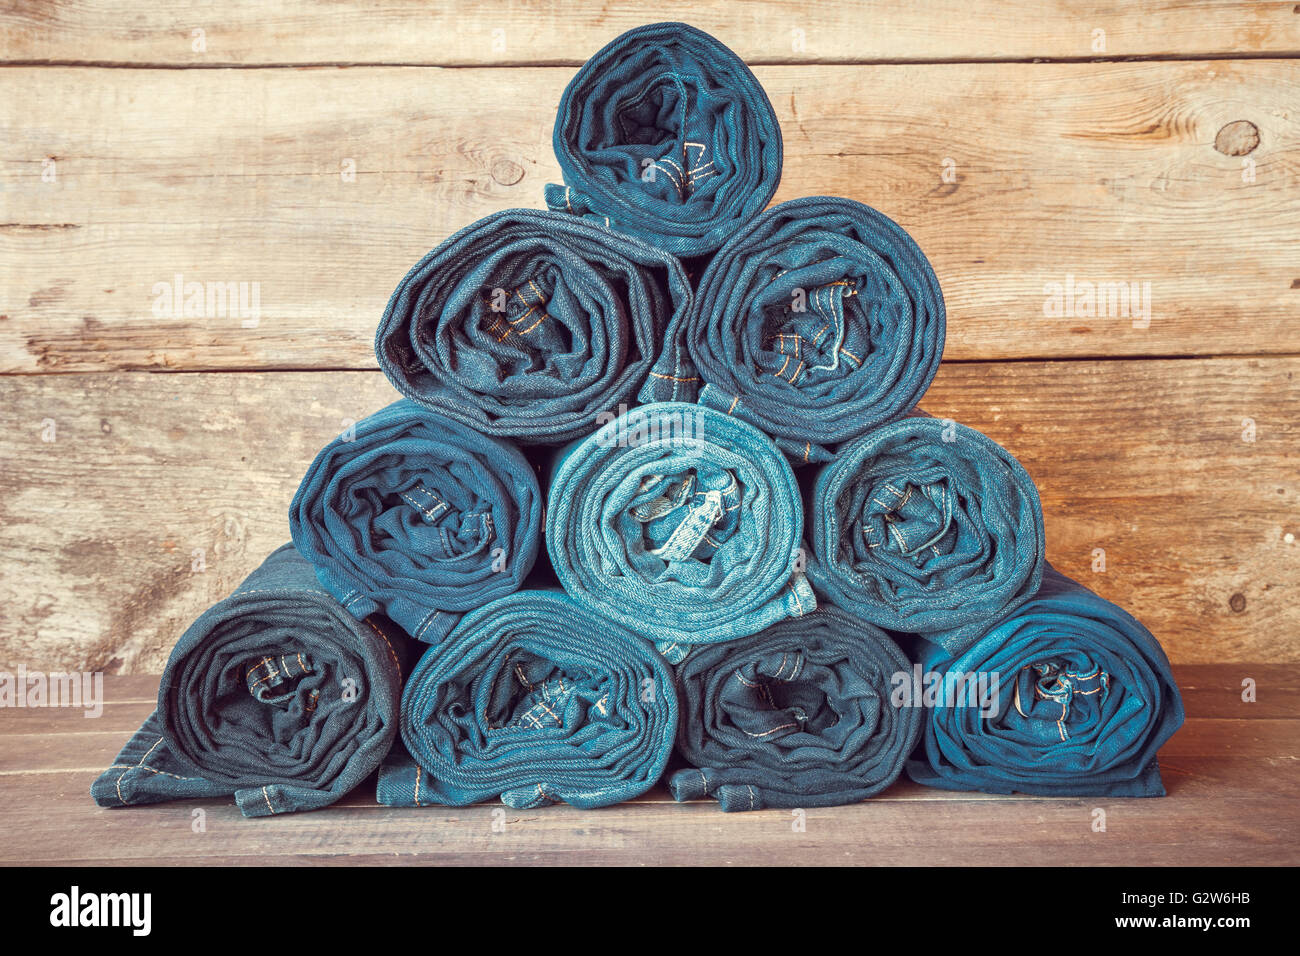 Rolled jeans stack on wooden background, retro toned. Stock Photo